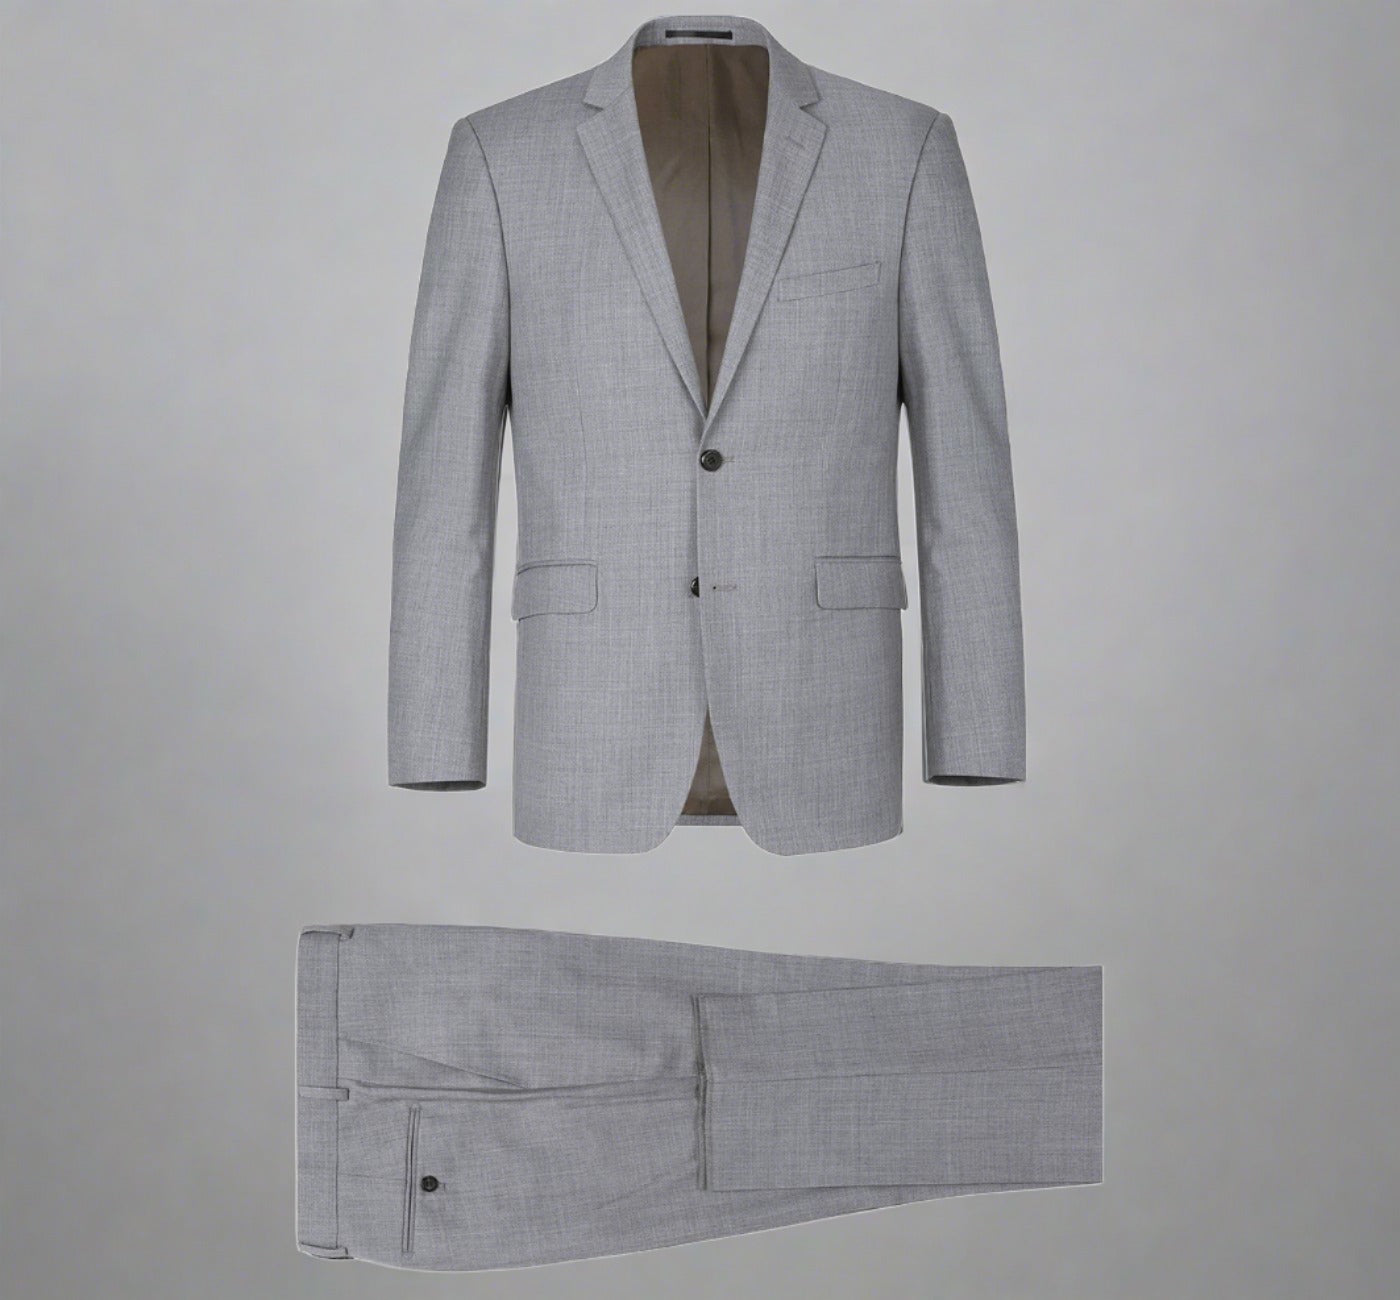 Super 140s Wool 2-Button CLASSIC FIT Suit in Grey (Short, Regular, and Long Available) by Renoir